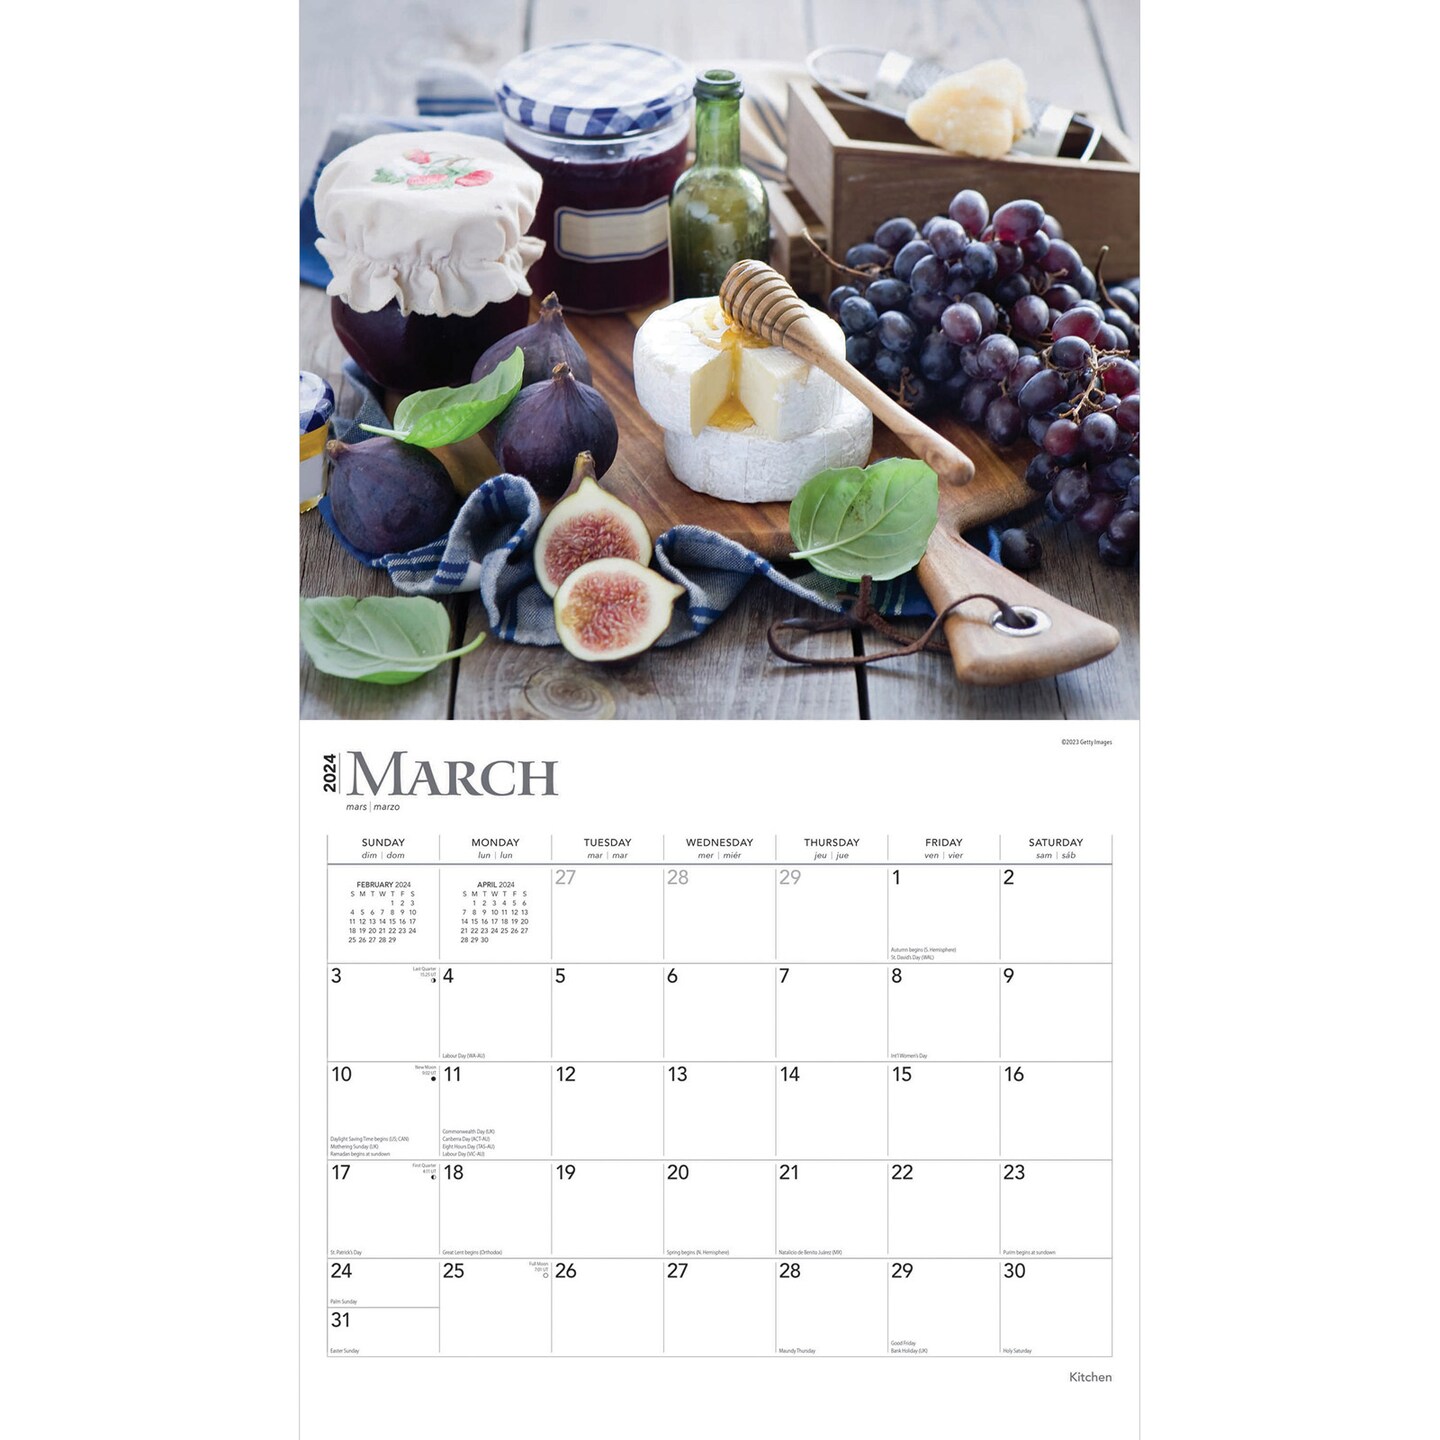 Kitchen | 2024 14 x 24 Inch Monthly Deluxe Wall Calendar | Sticker Sheet | StarGifts | Cooking Home